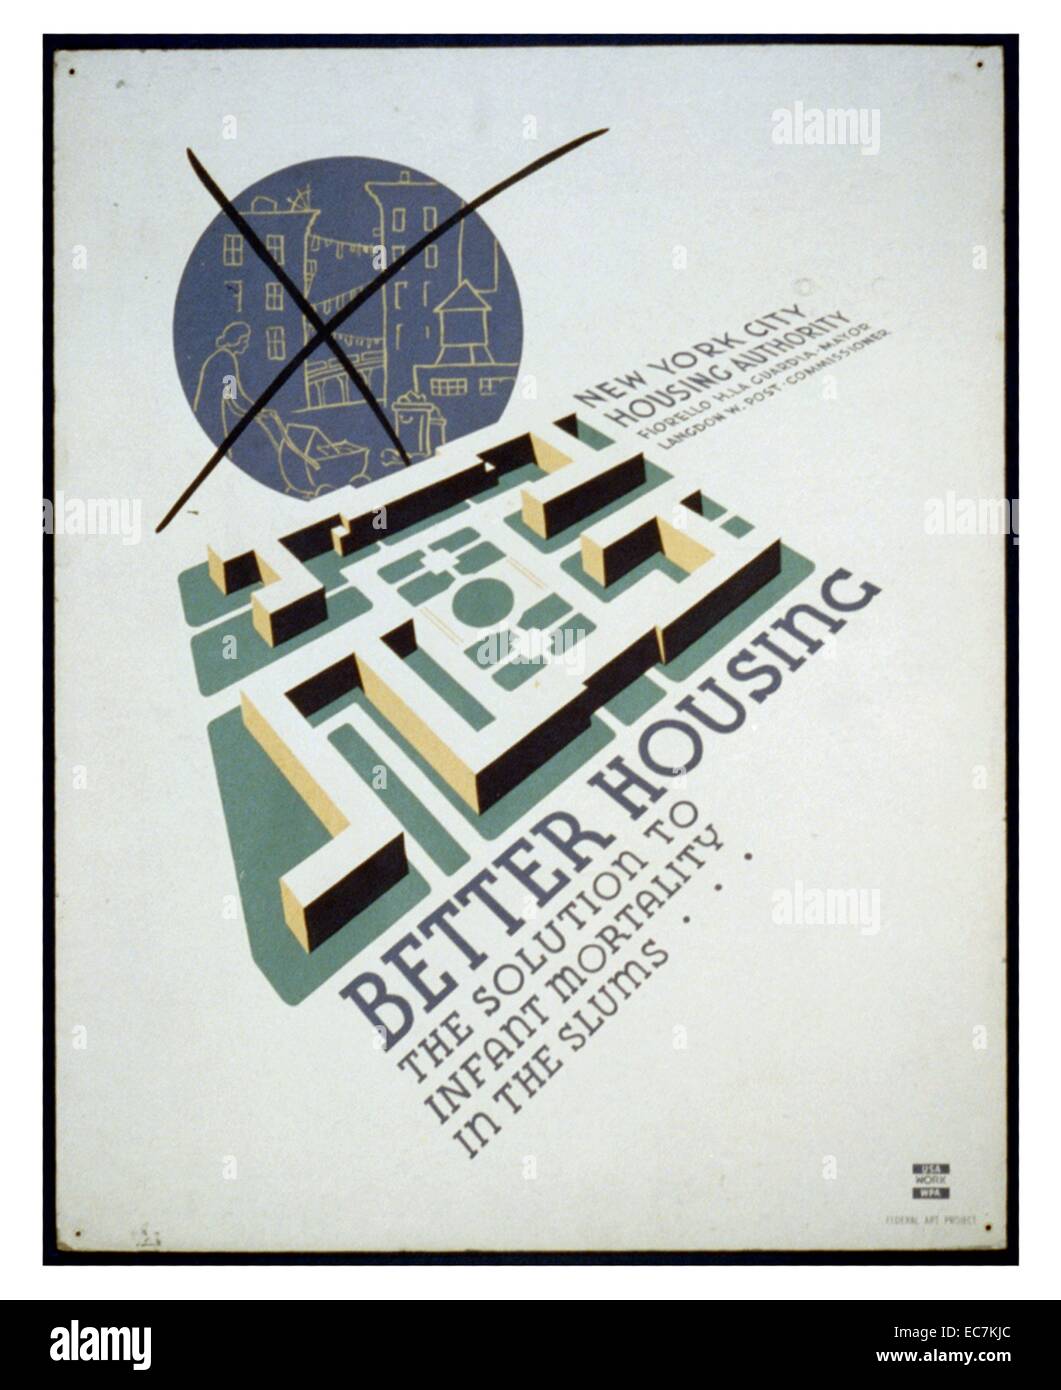 Better housing: The solution to infant mortality in the slums. A poster by the New York City Housing Authority promoting better housing as a solution for the high rates of infant mortality in the slums. It shows a planned housing community and in the background a crossed-out telescopic view of tenement housing. Stock Photo